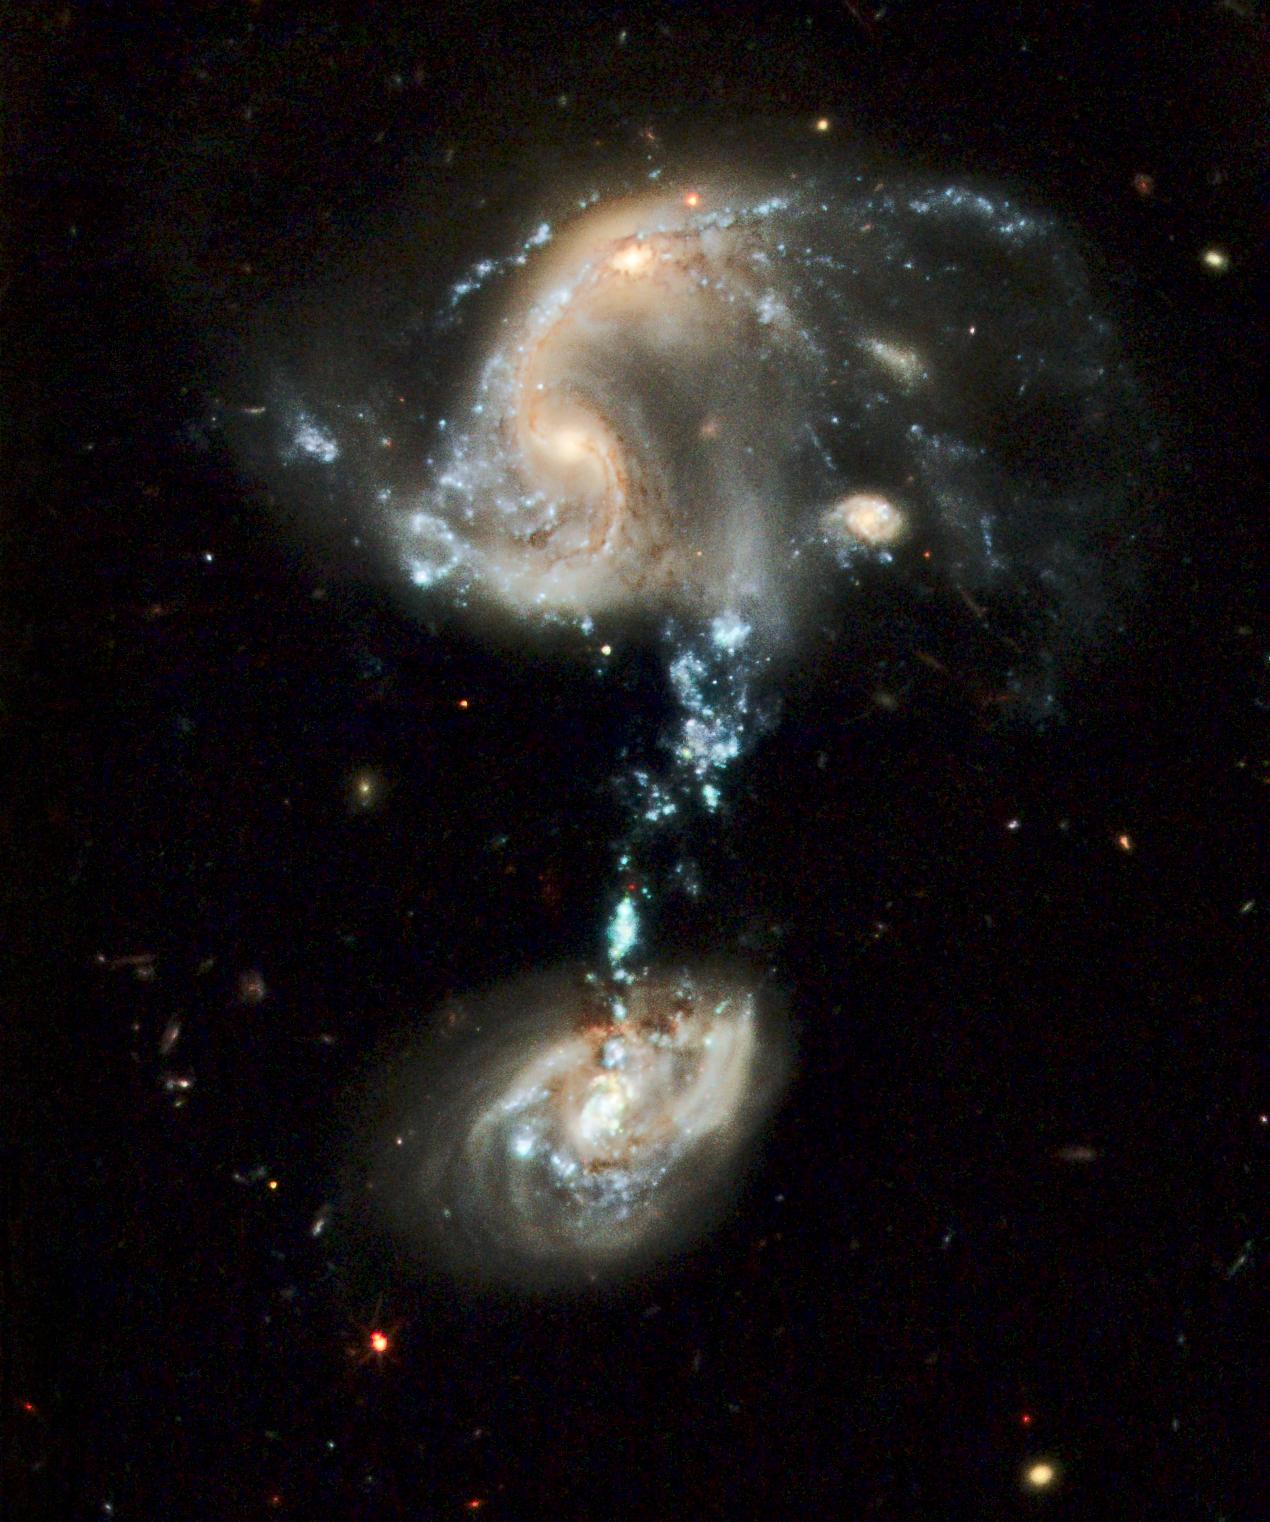 Large galaxy at the top of the image, spiraling in, at the bottom a smaller galaxy is there, the two galaxies are almost linked by a bright blue line of stars and gas.